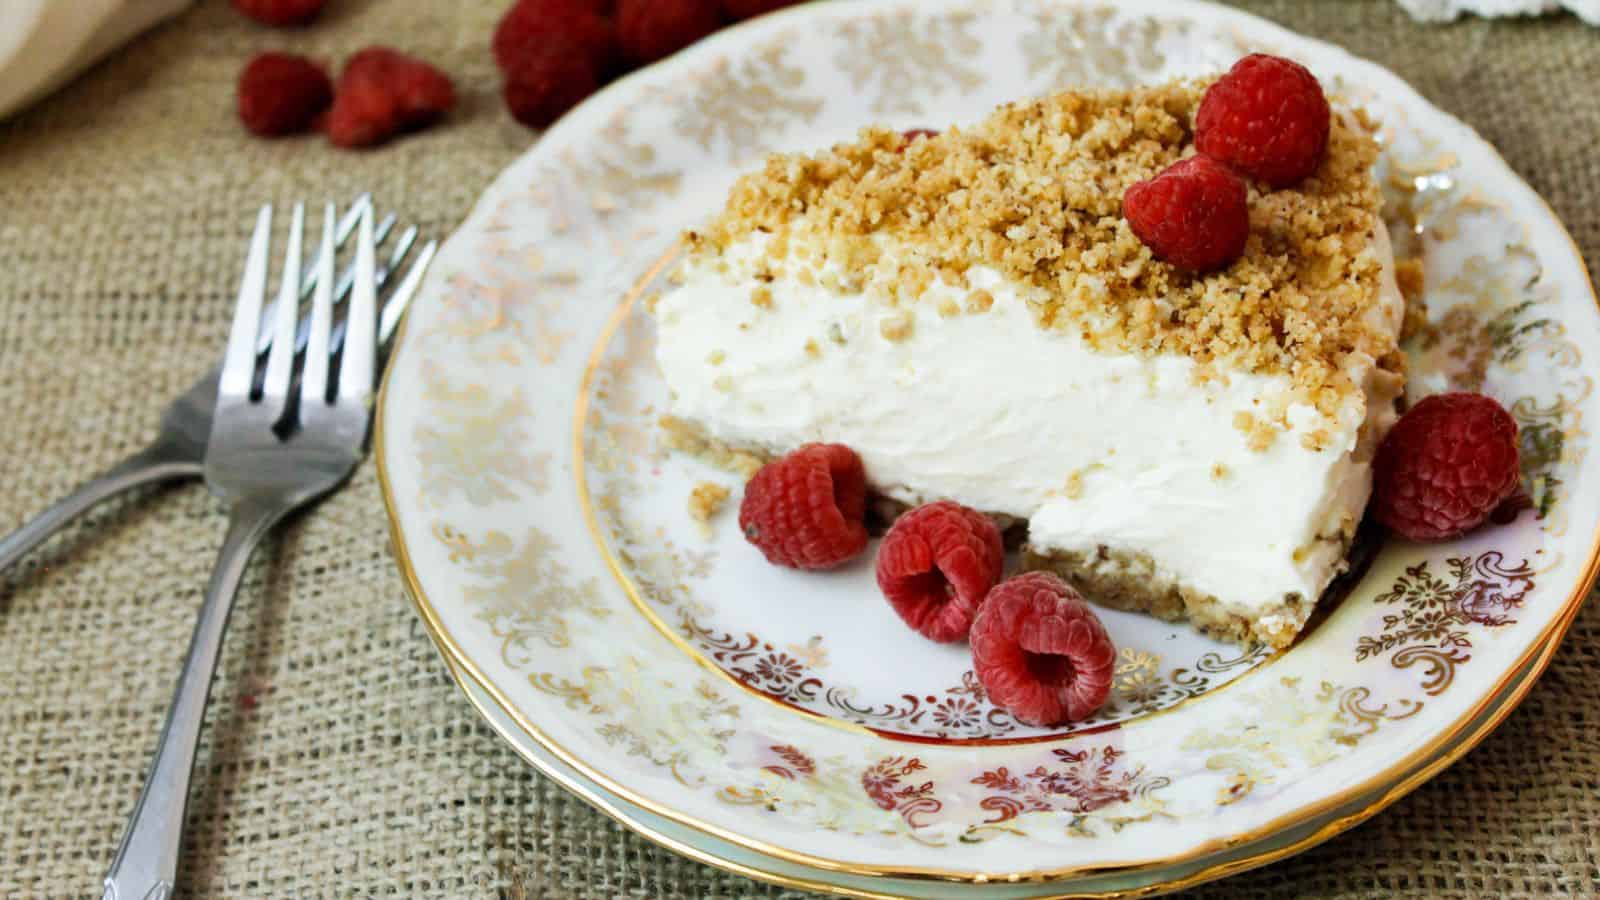 Side view of cheesecake slice with raspberries.